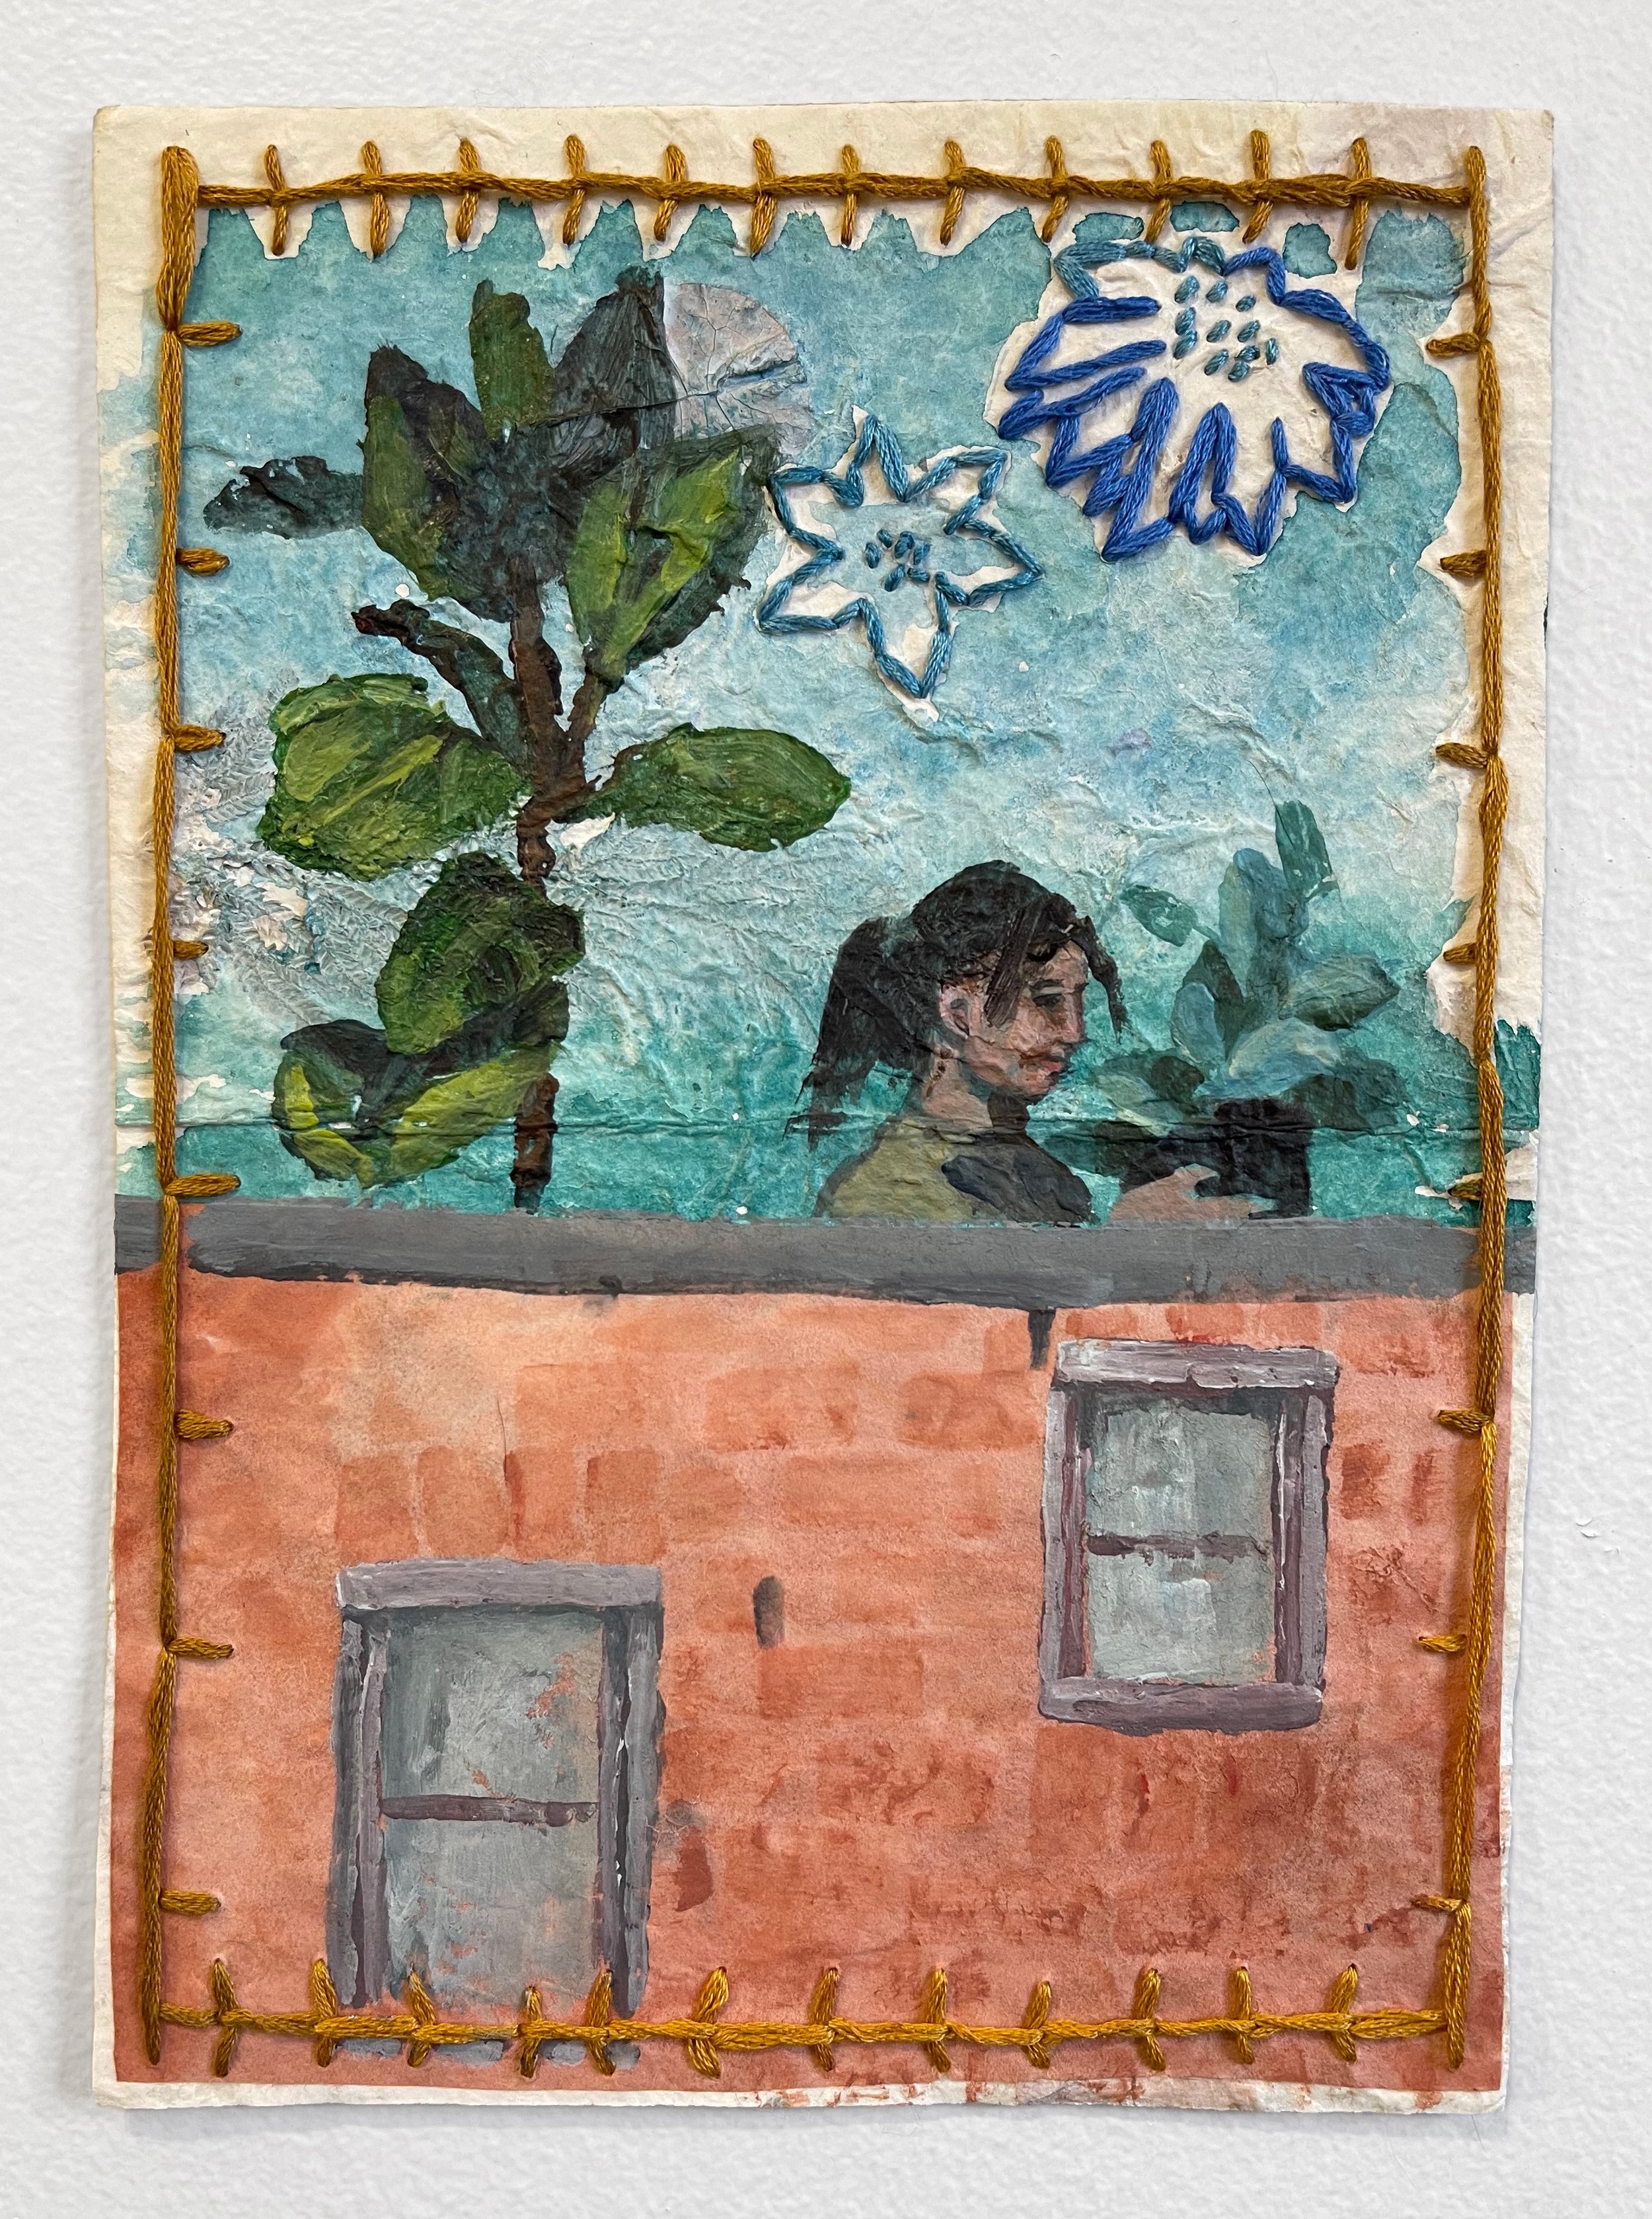  "Rooftop Garden", Acrylic, embroidery and collage on paper, 9.5” x 6.5”, 2023   